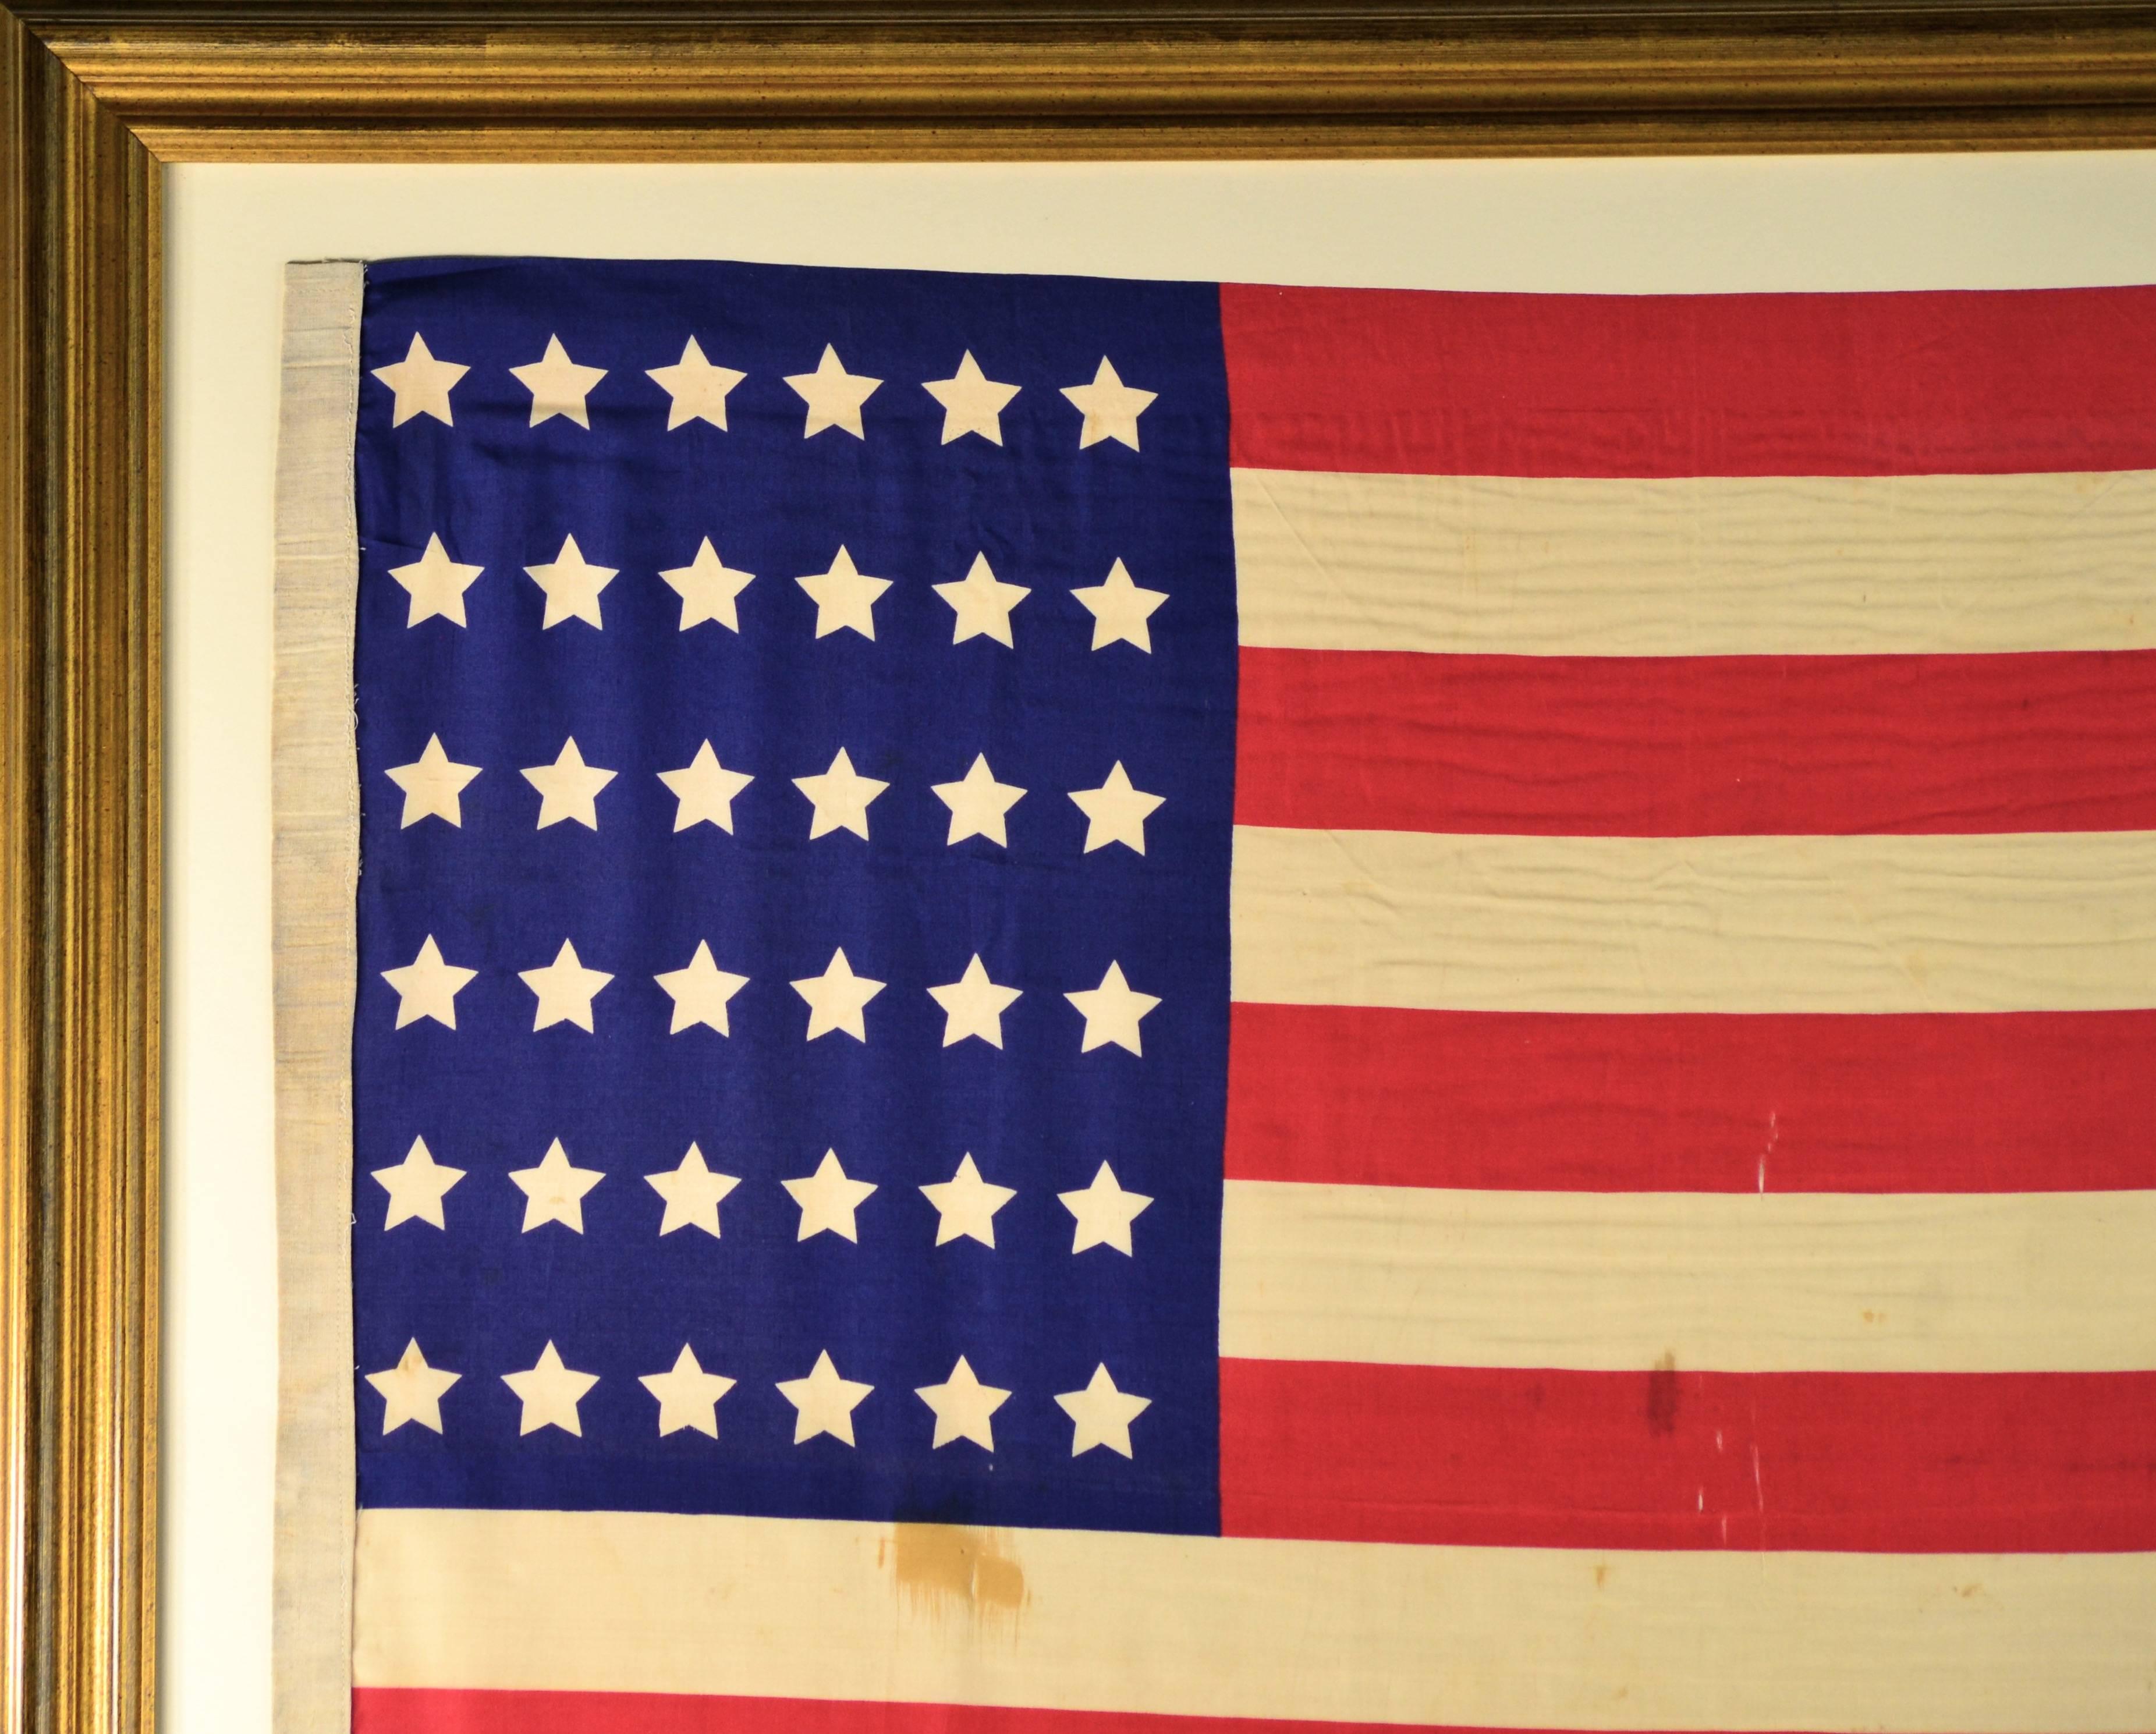 Civil War Regimental flag with 36 stars, circa 1864. Made of silk with linen sleeve hoist. Very rare size proportion for the canton as its very narrow. Official US Army silk Regimental flags of the era were 36